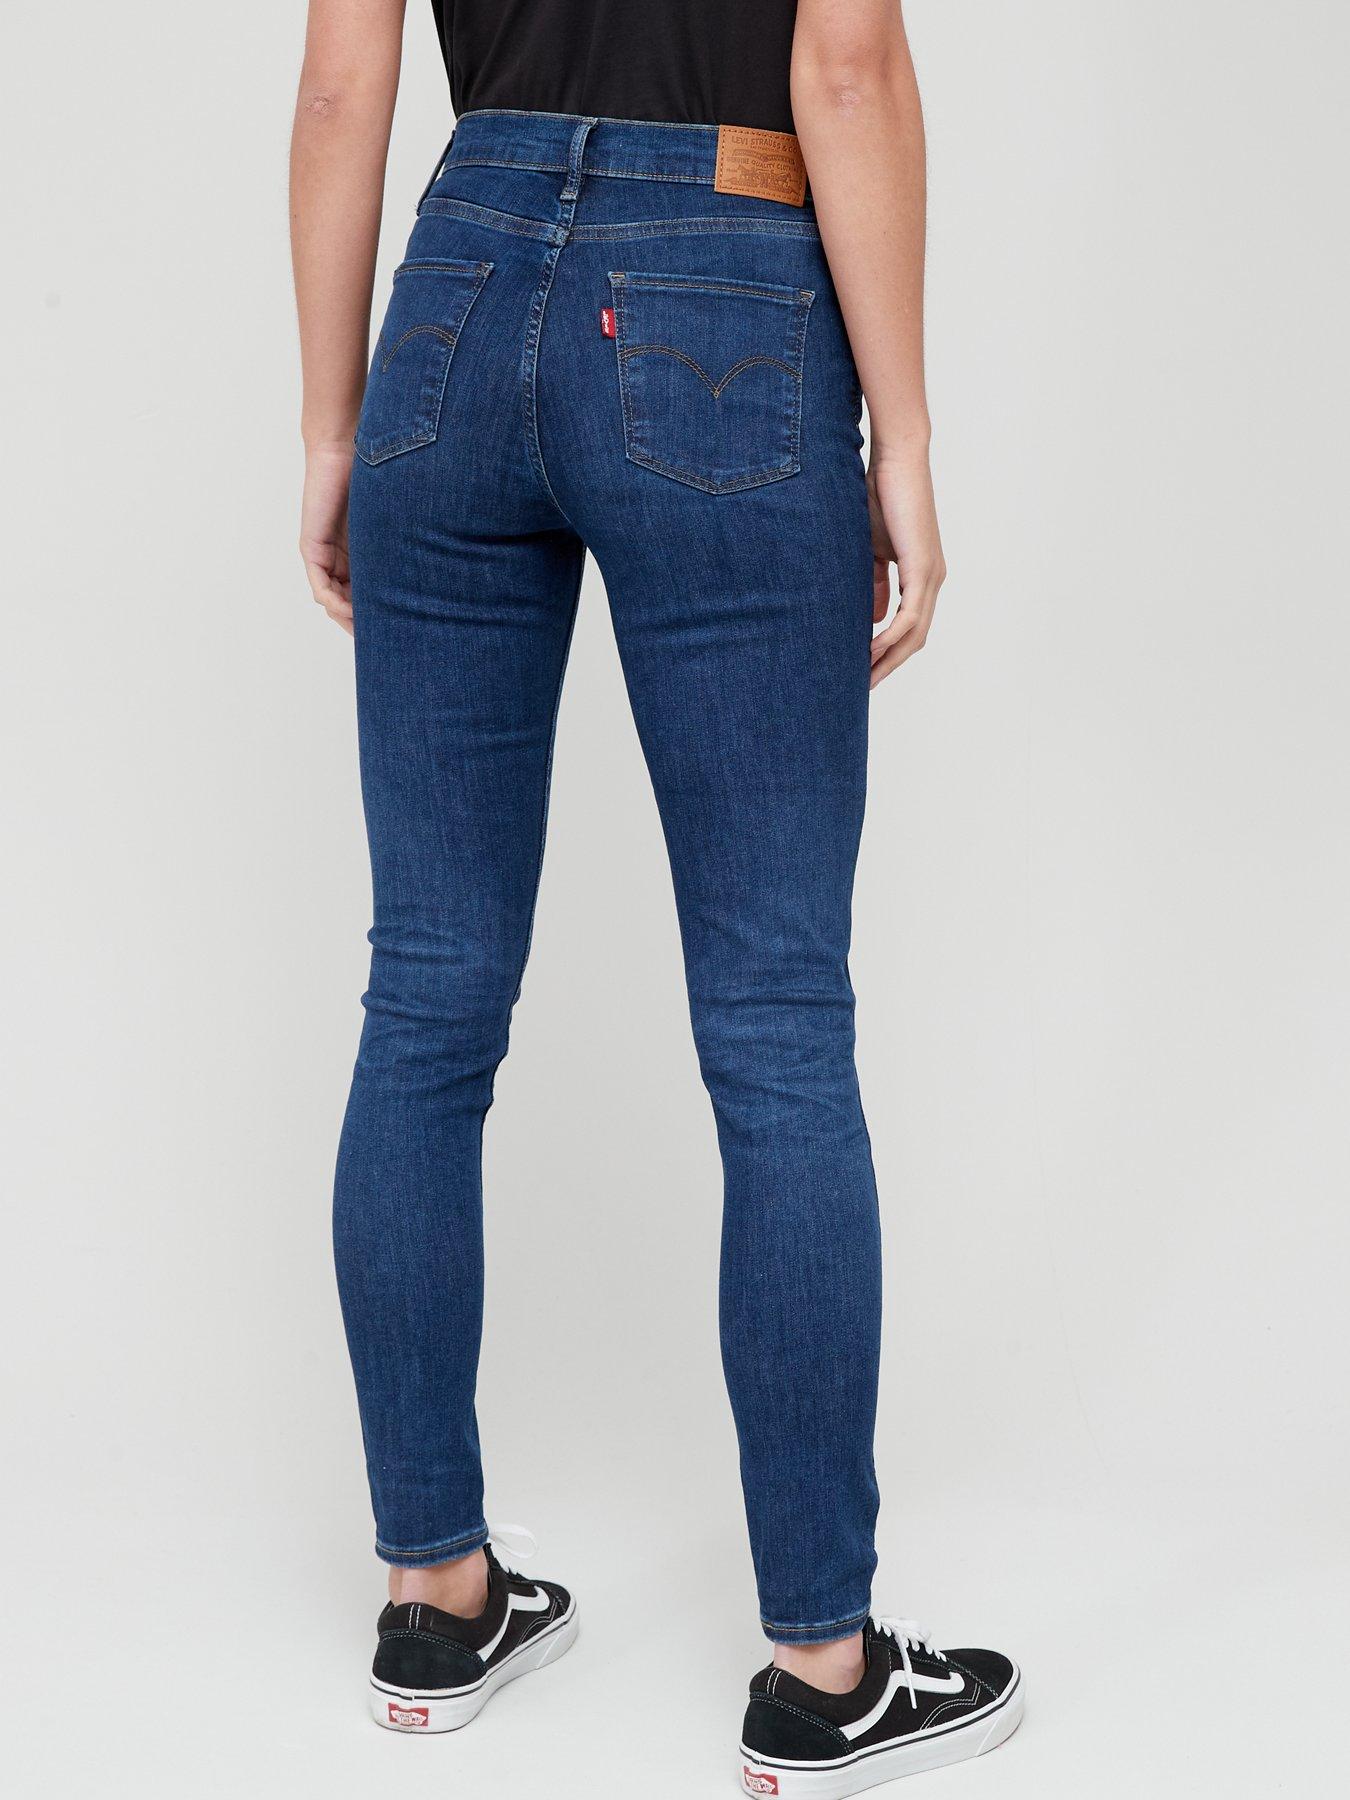 Denim brand debuts extreme cut out jeans for $168 – and the